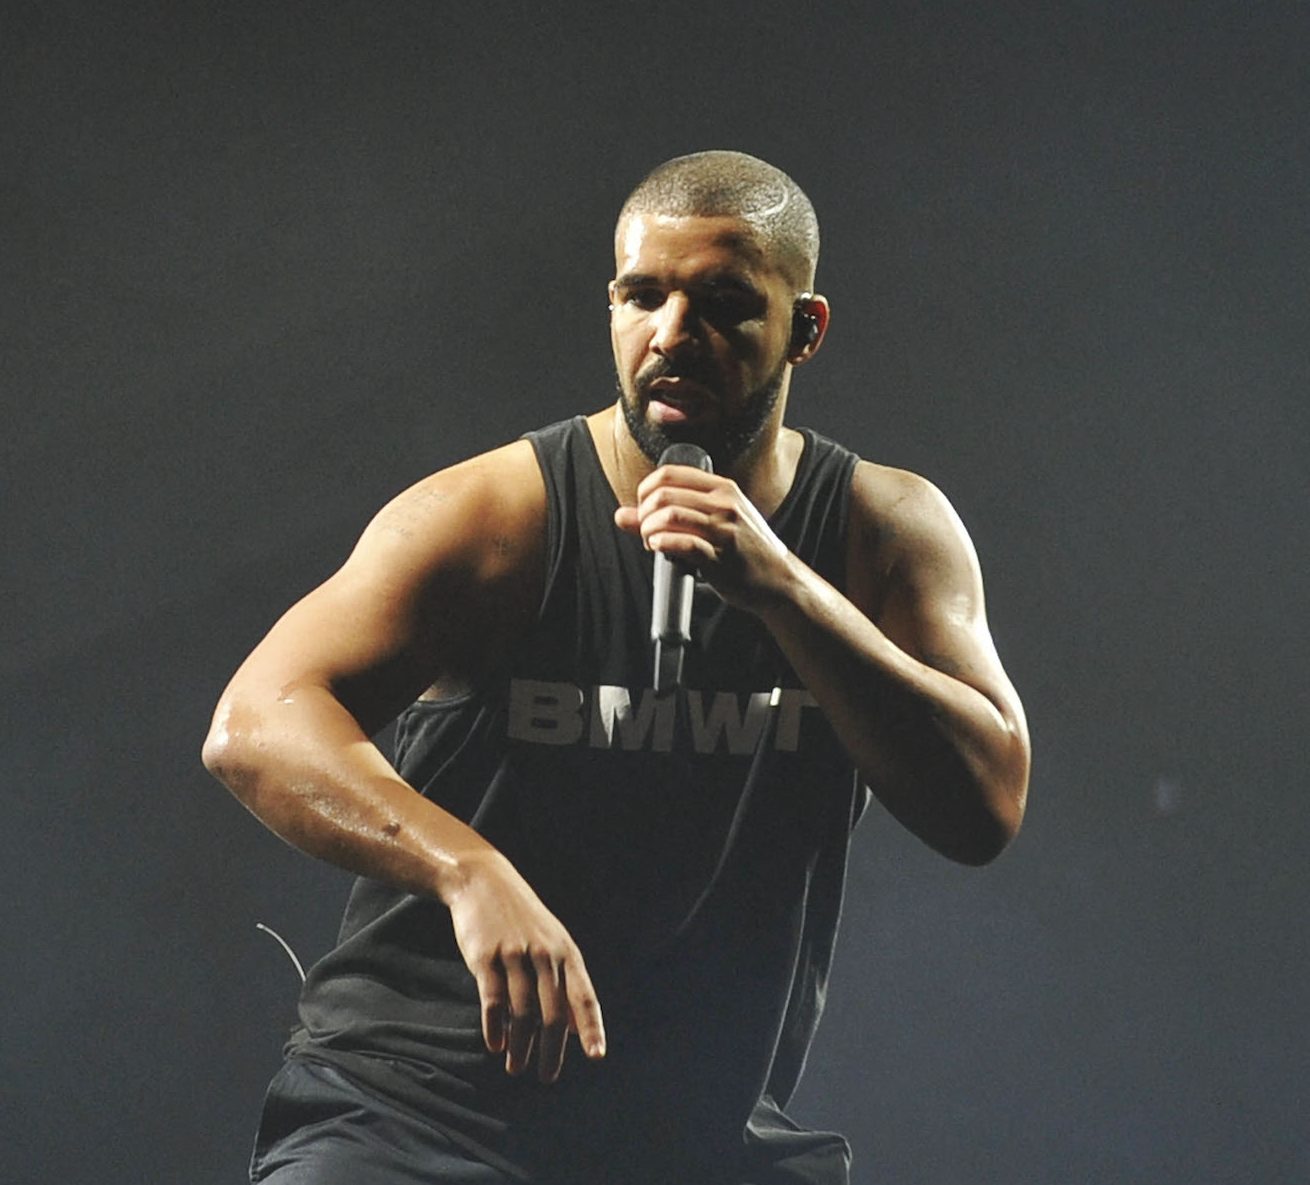 Playboy reacts after woman who threw 36G bra to Drake at New York